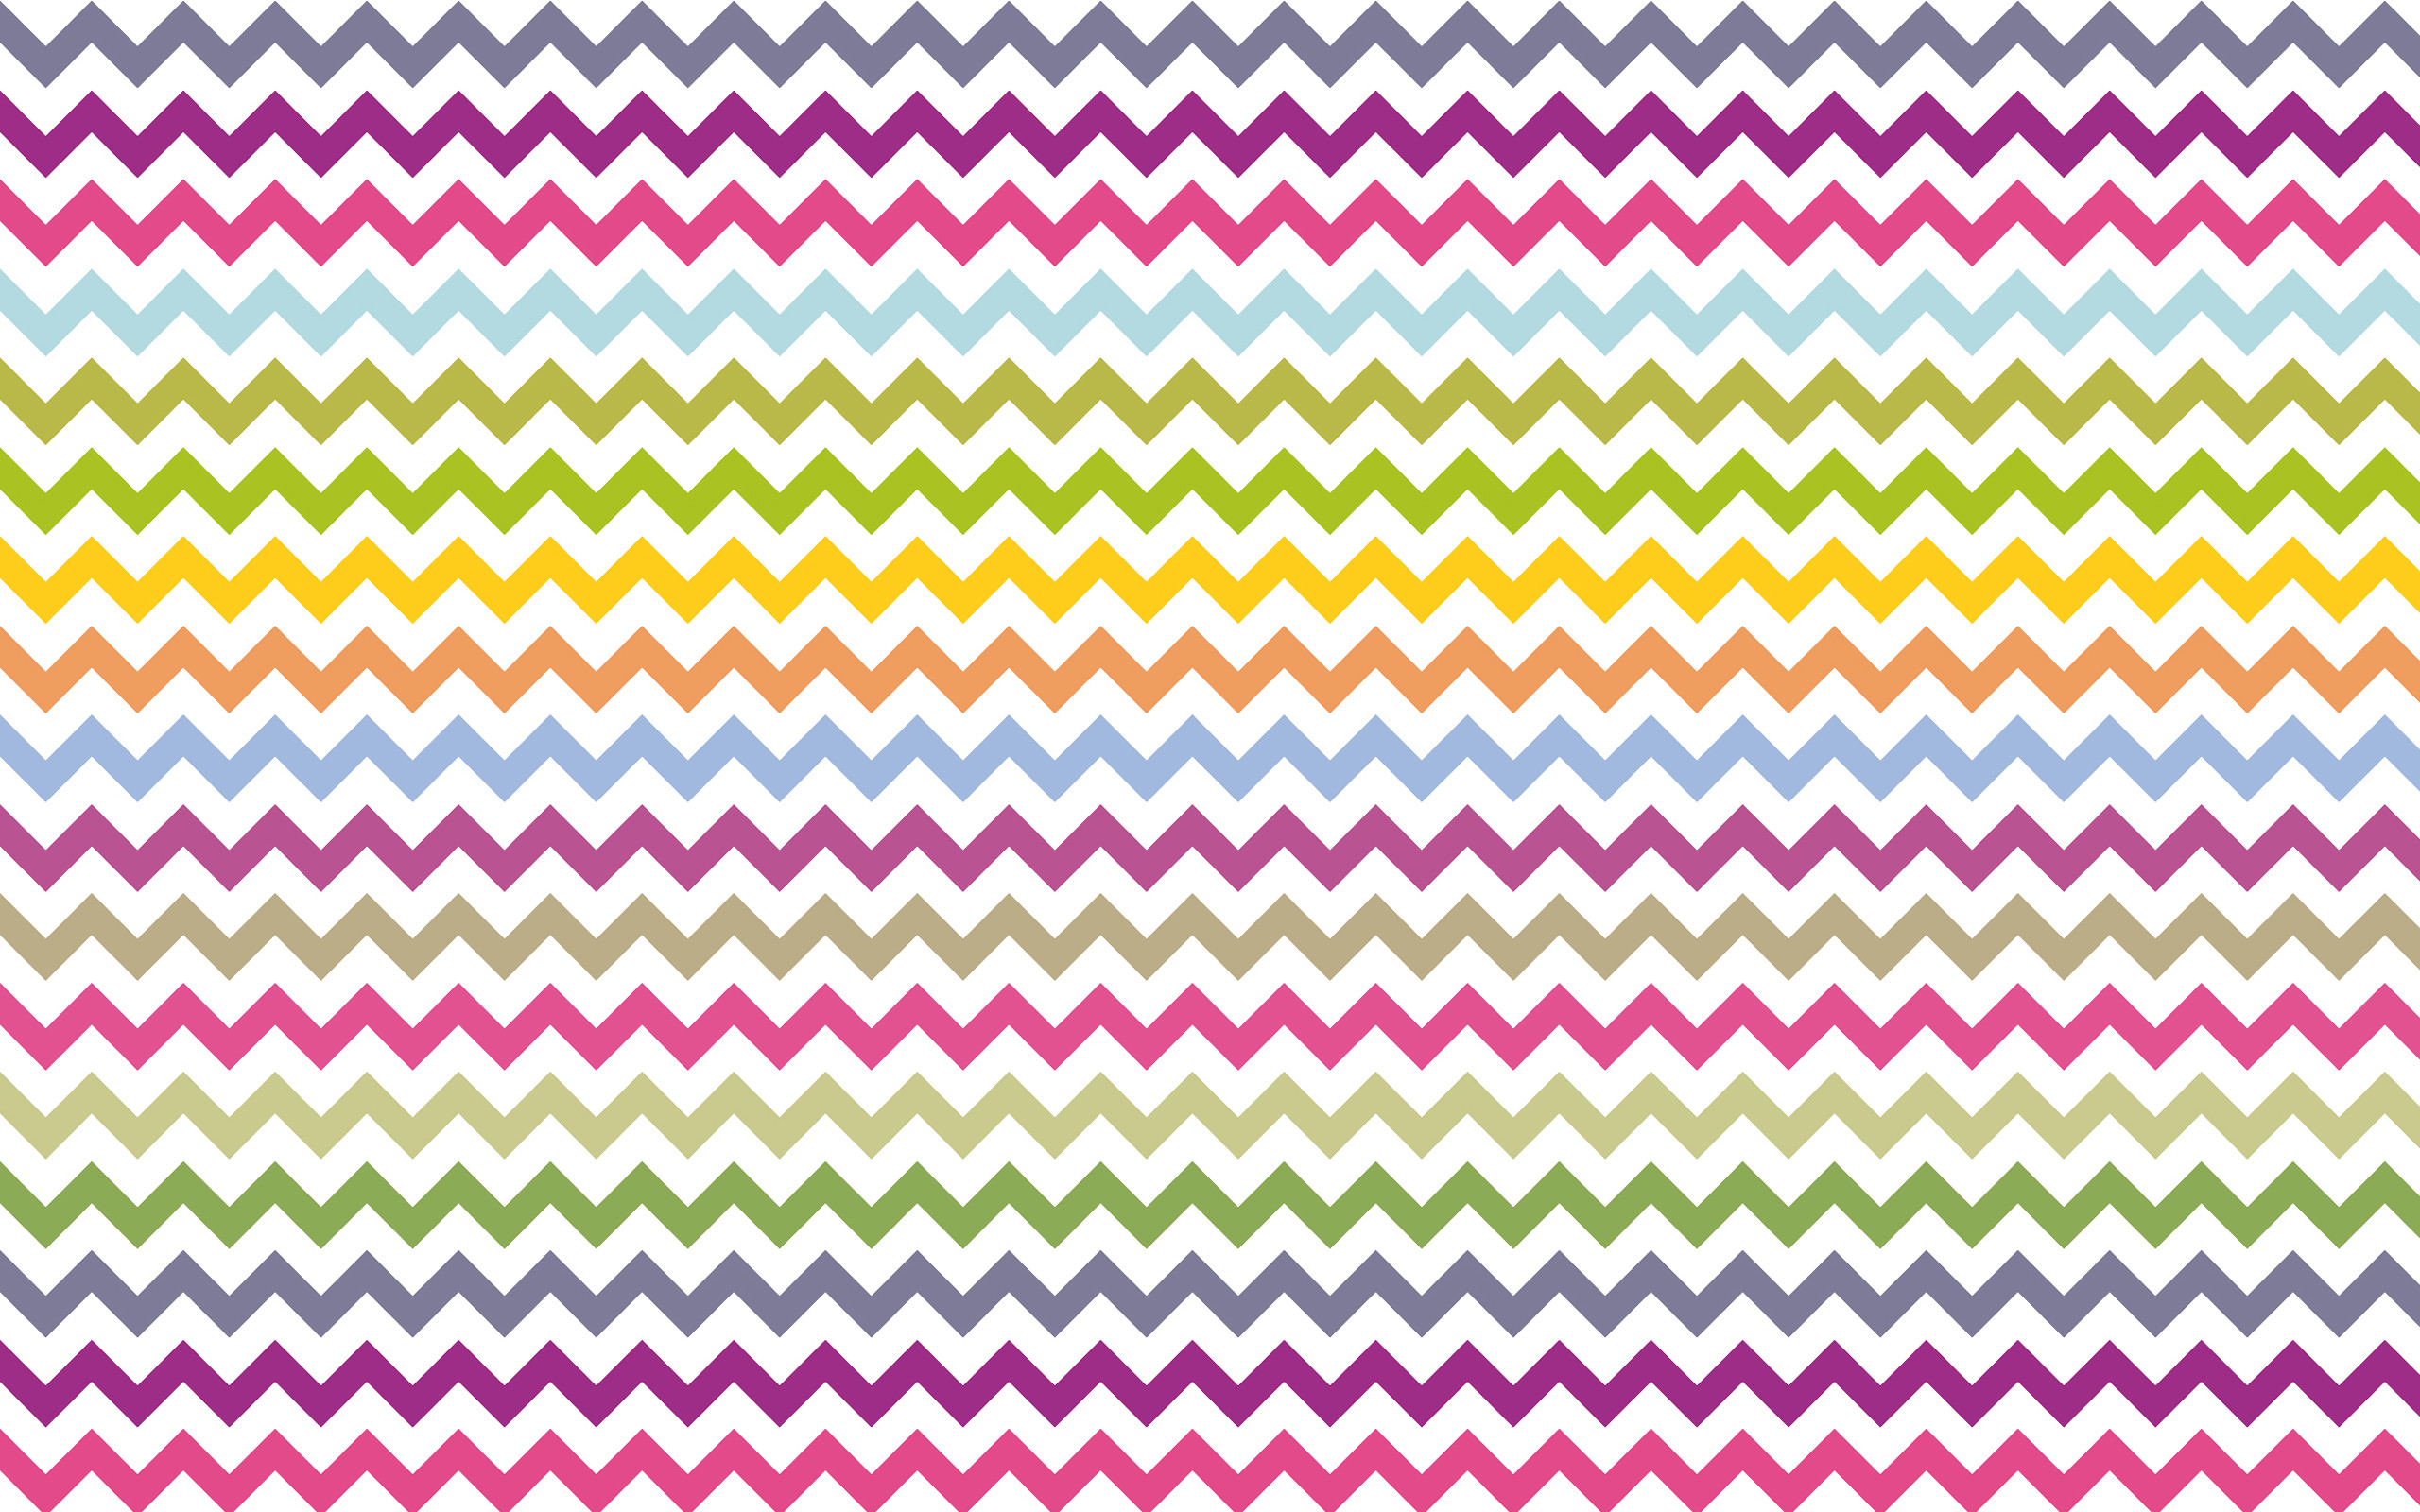 2560x1600 Chevron wallpaper for iPhone or Android. Tags: chevron, pattern .